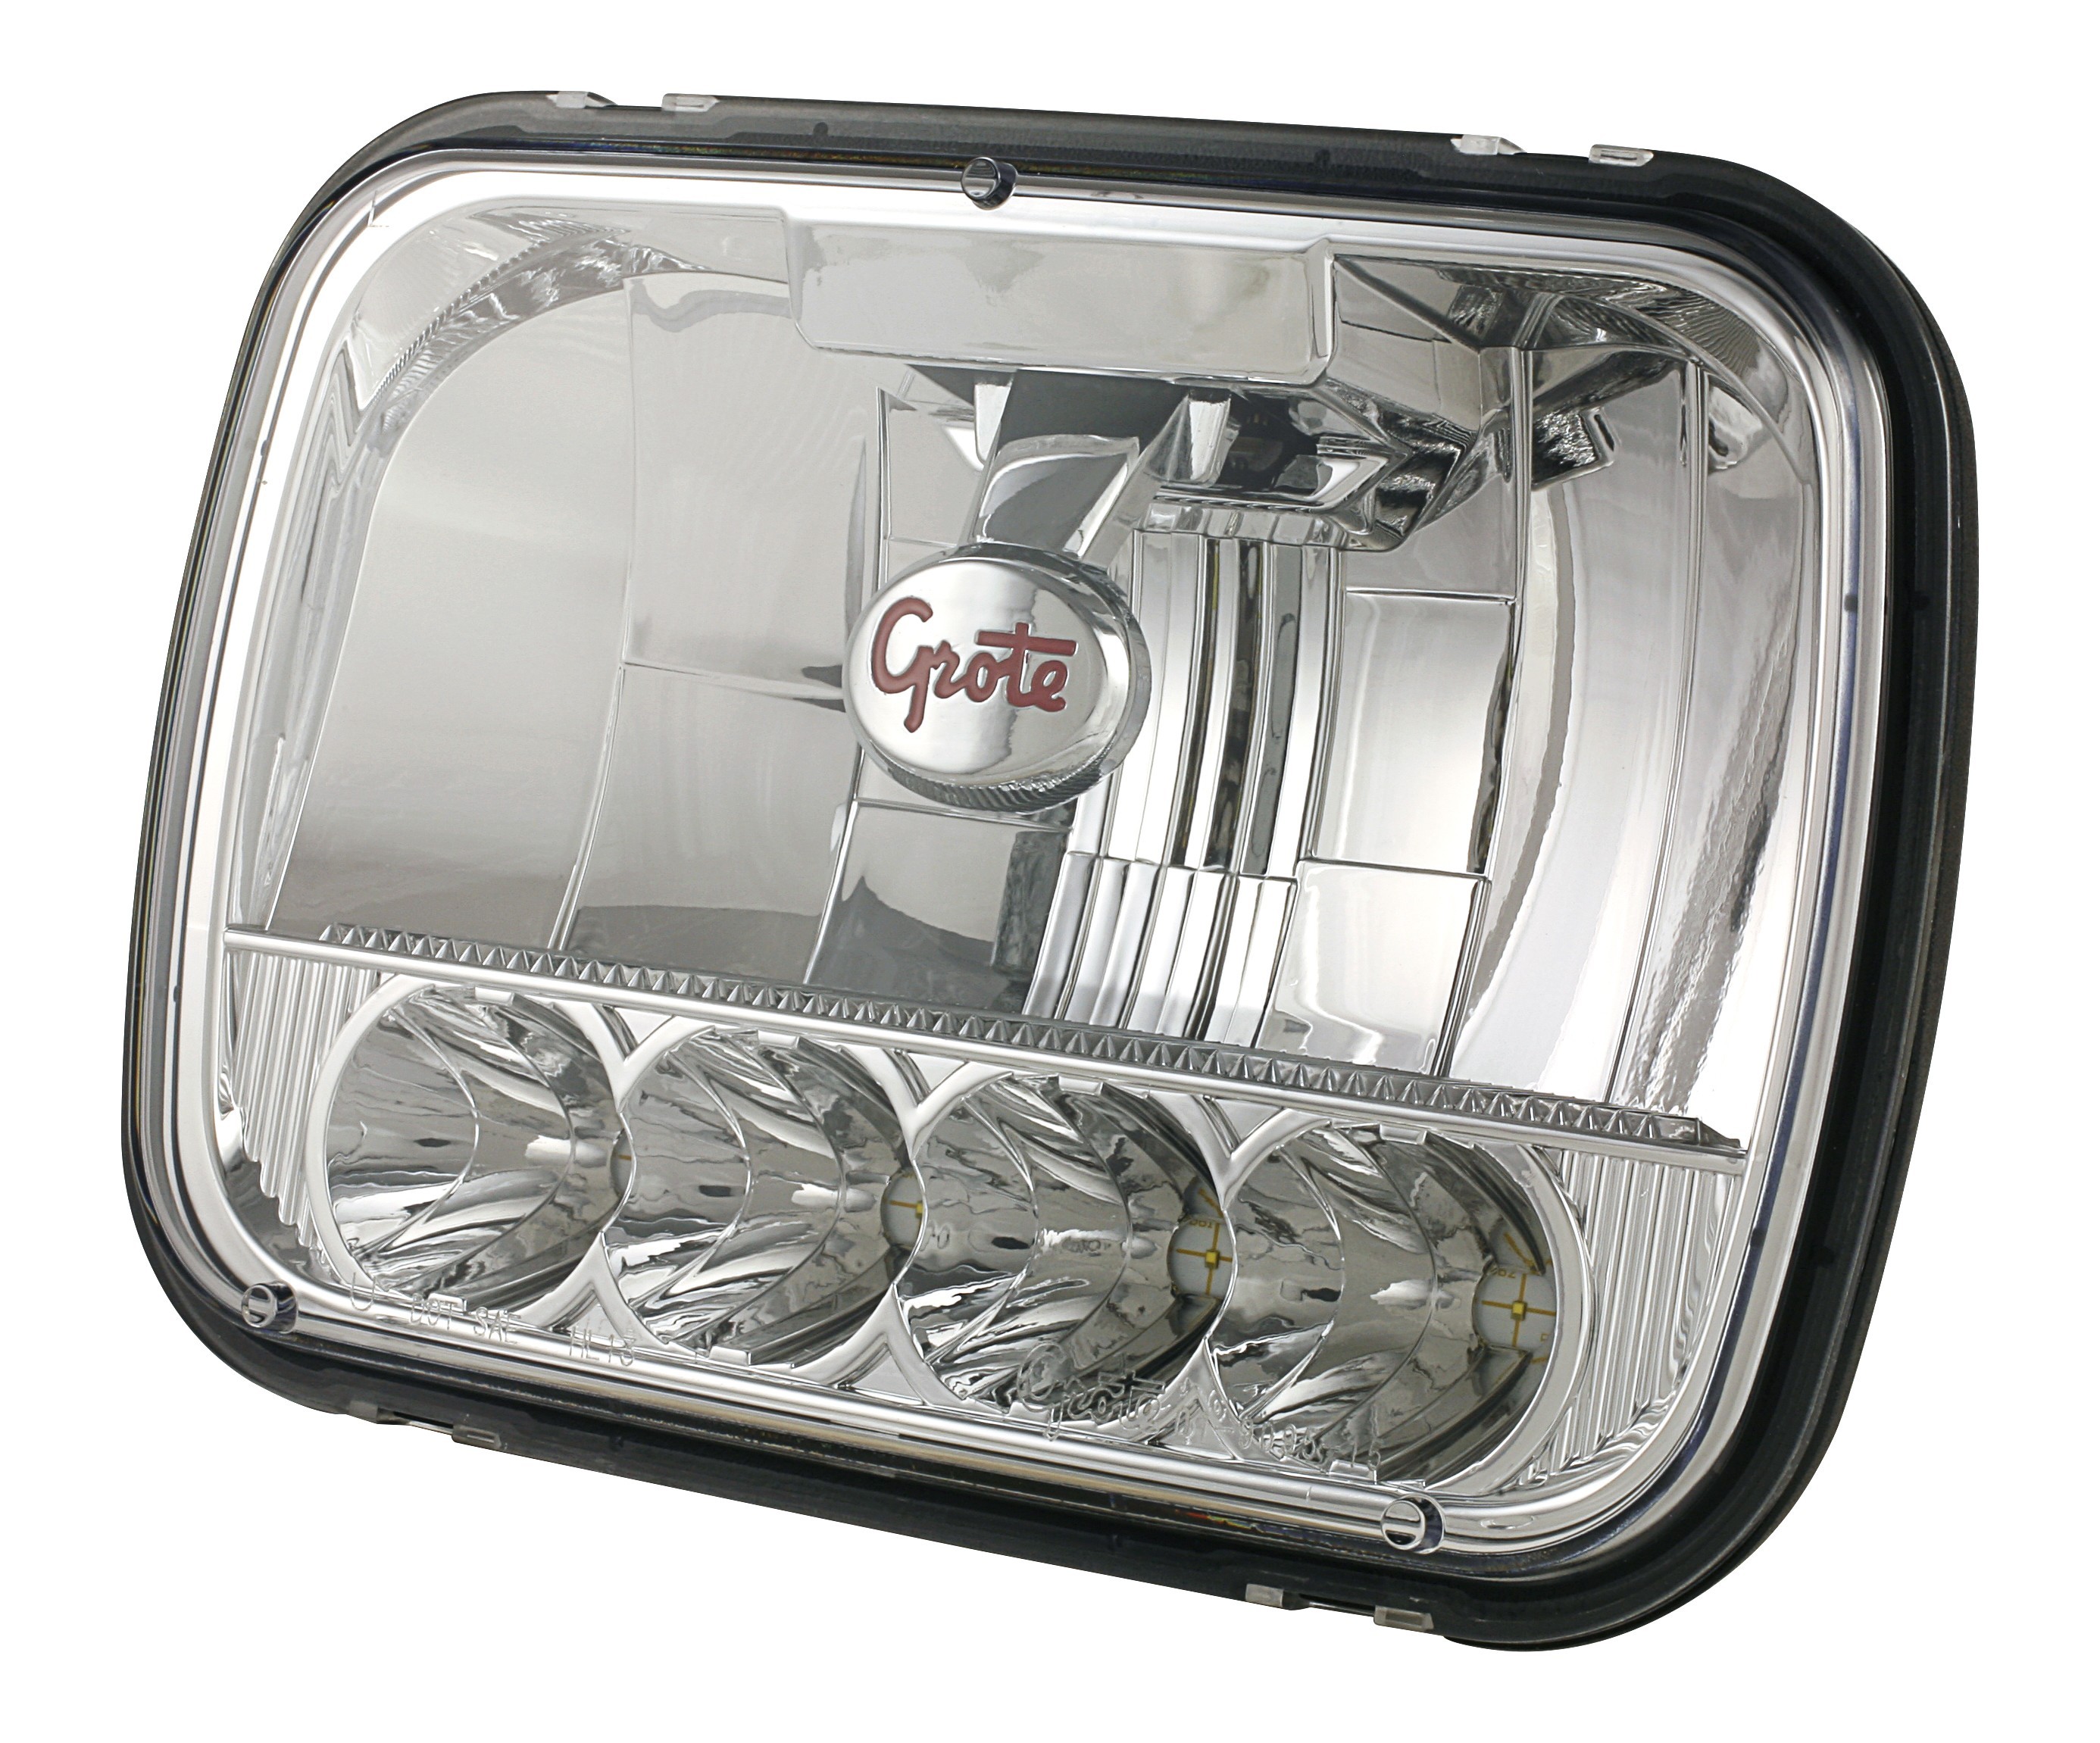 Grote Industries 5 – Grote 5—7 LED Sealed Beam Replacement Headlight